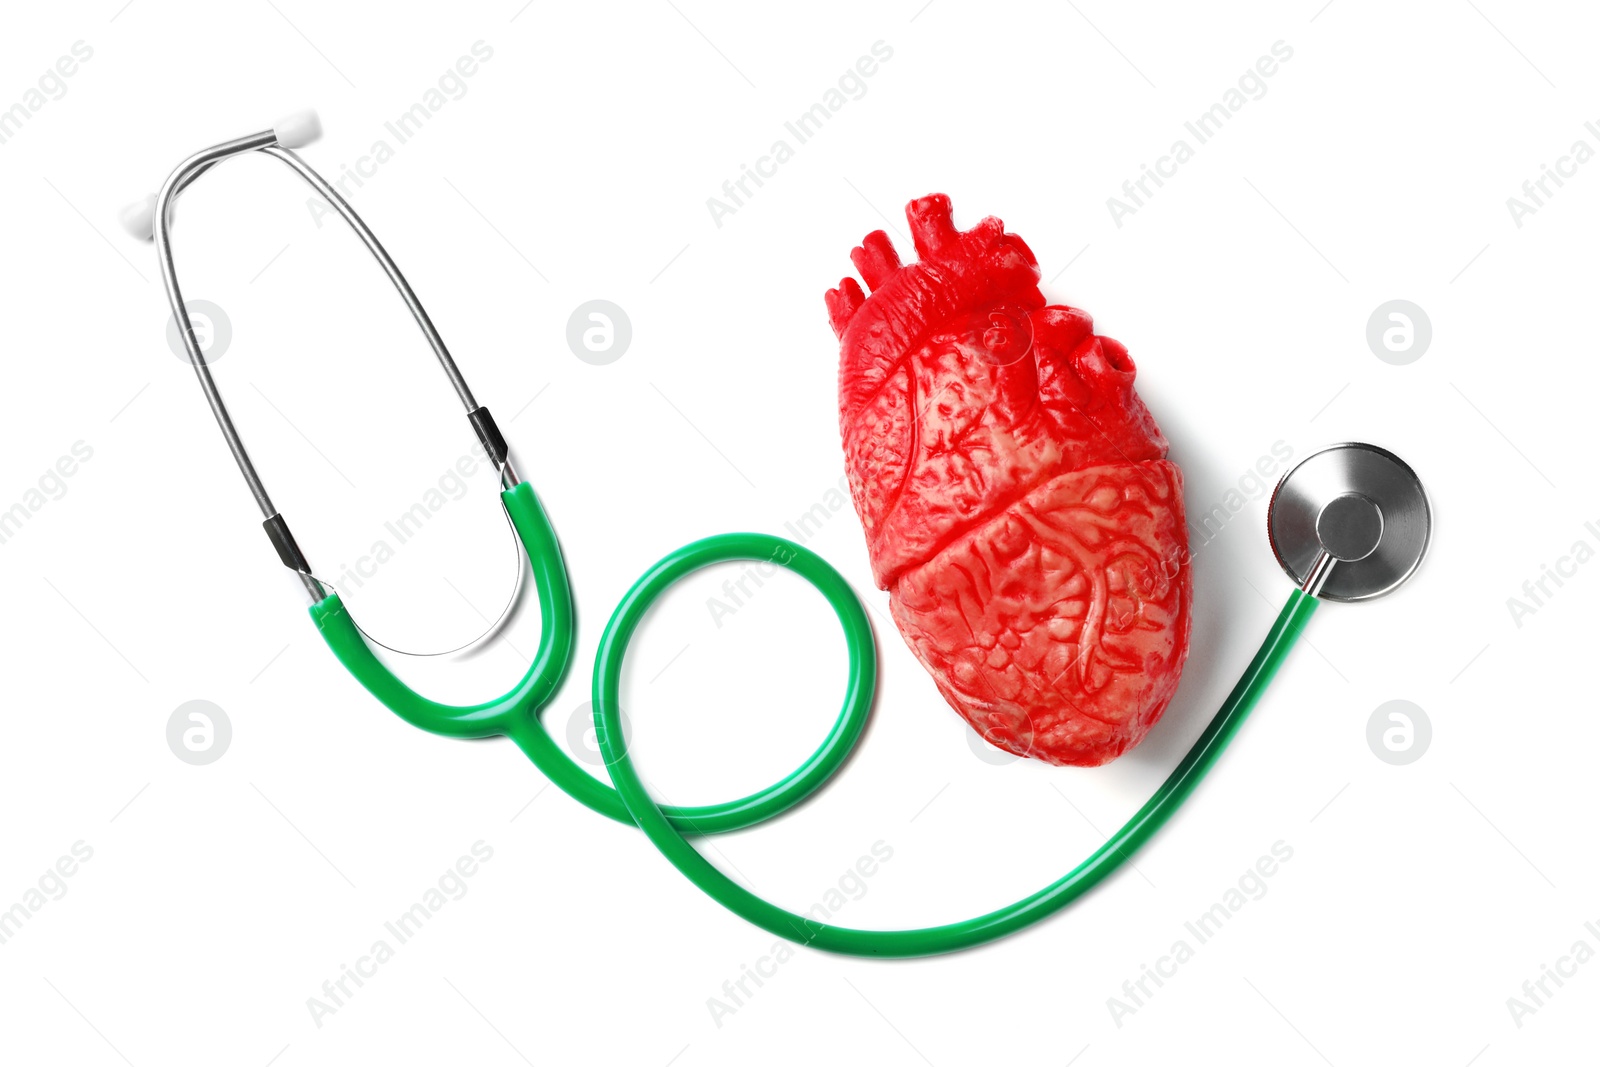 Photo of Stethoscope for checking pulse and heart model on white background, top view